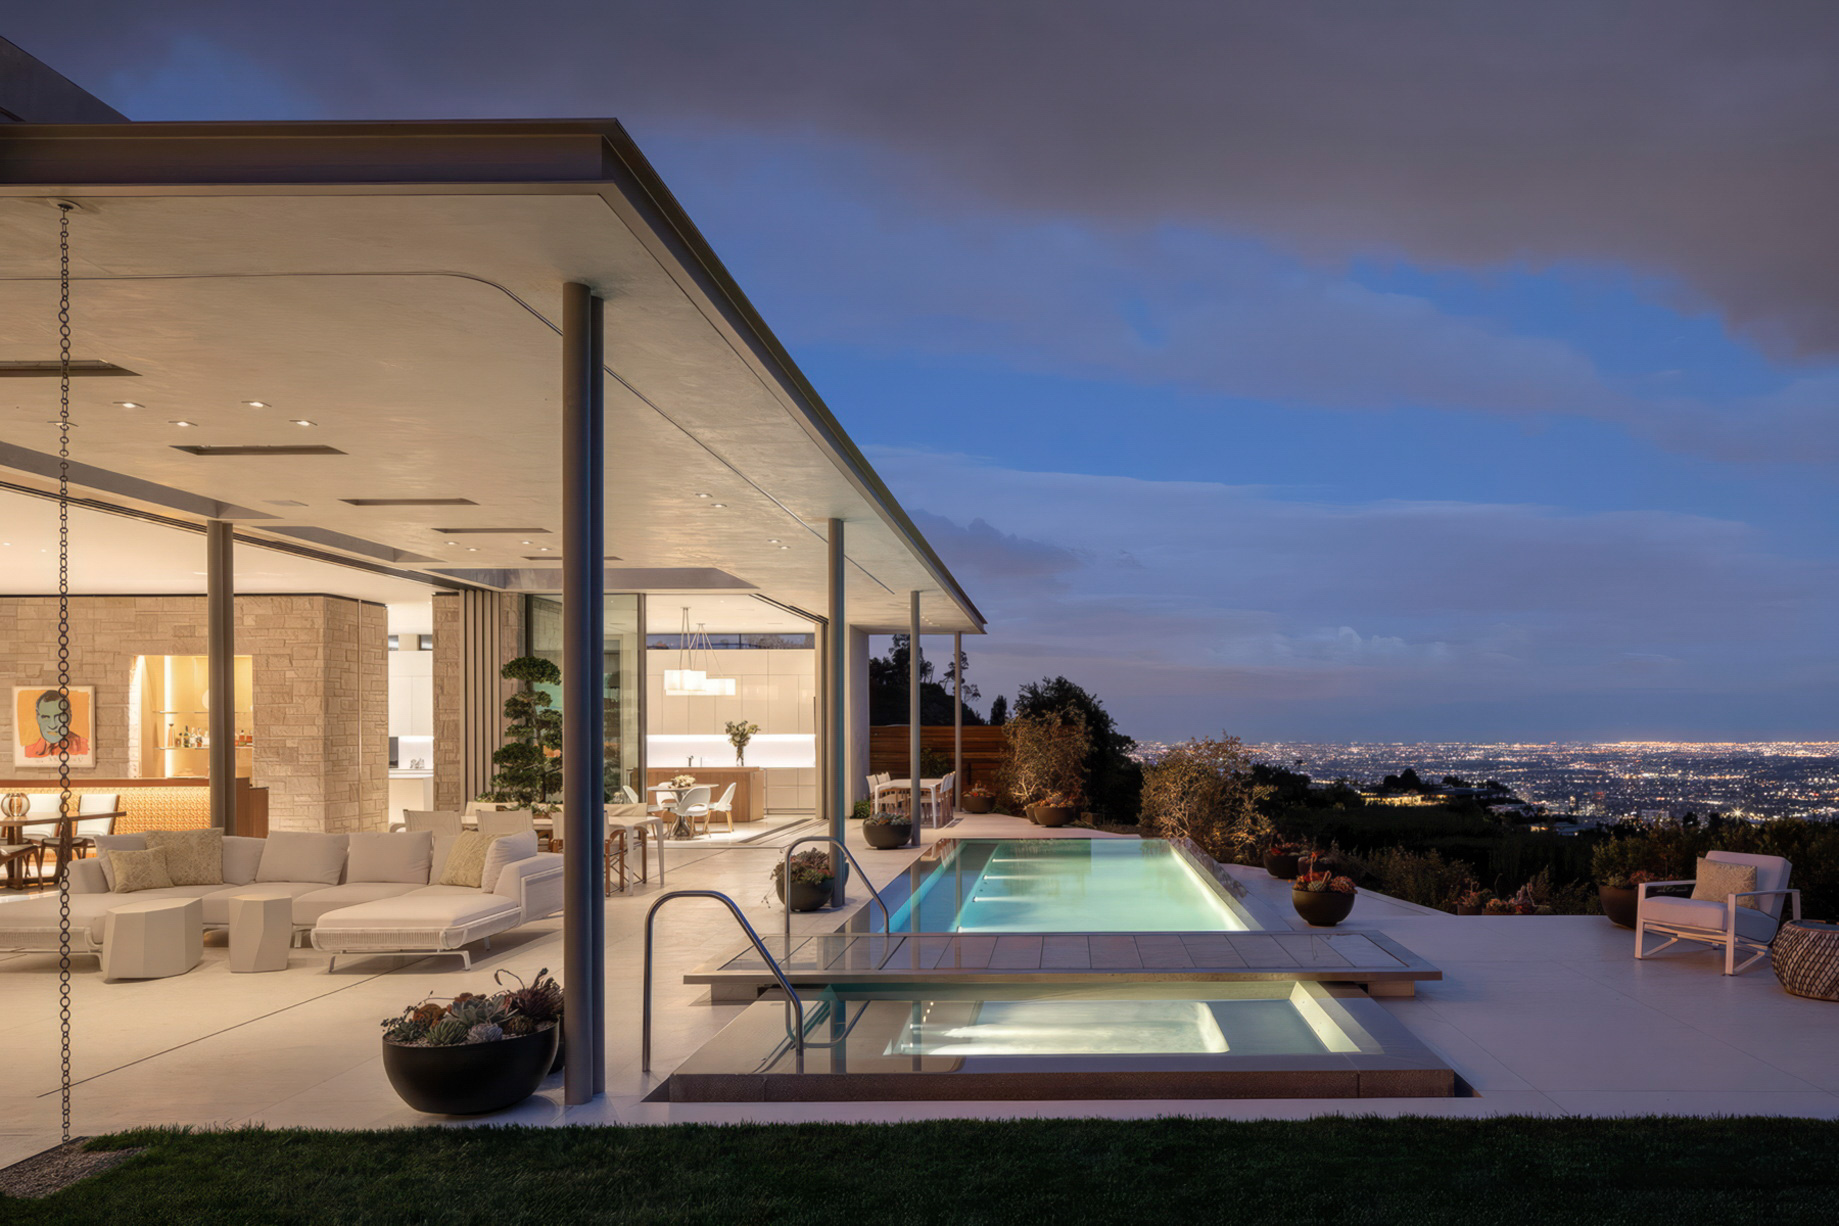 Lori Kanter Tritsch and William P. Lauder’s Trousdale Estates Home – Beverly Hills, CA, USA – 1